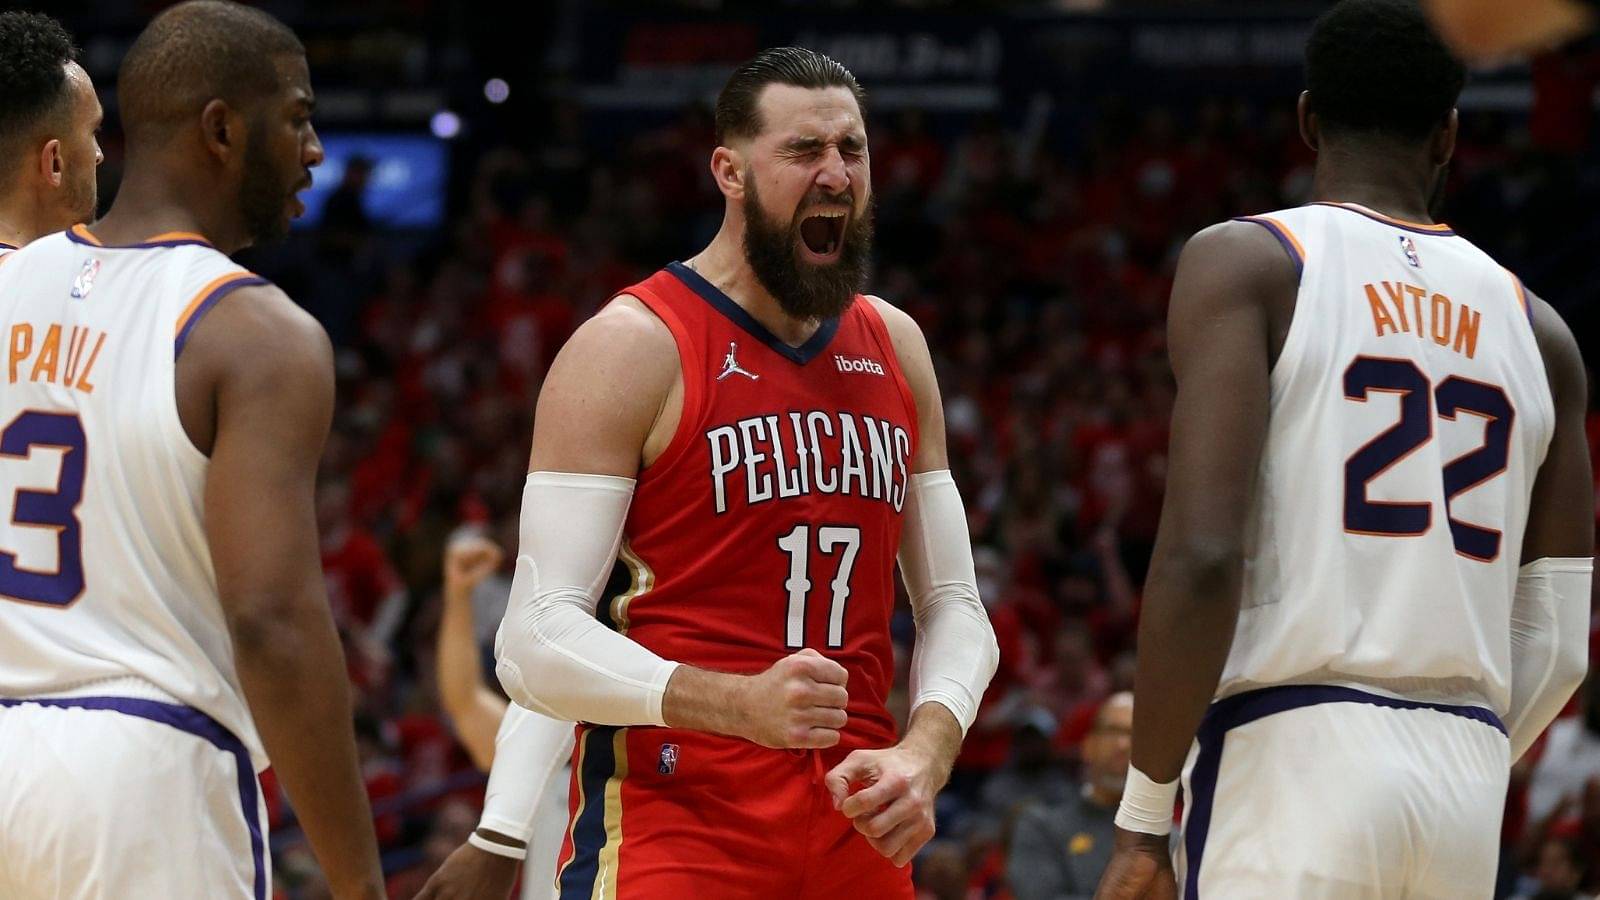 "Jonas Valanciunas OWNS Deandre Ayton": NBA Twitter reacts as Pelicans big man dominates Chris Paul and Co to level the series